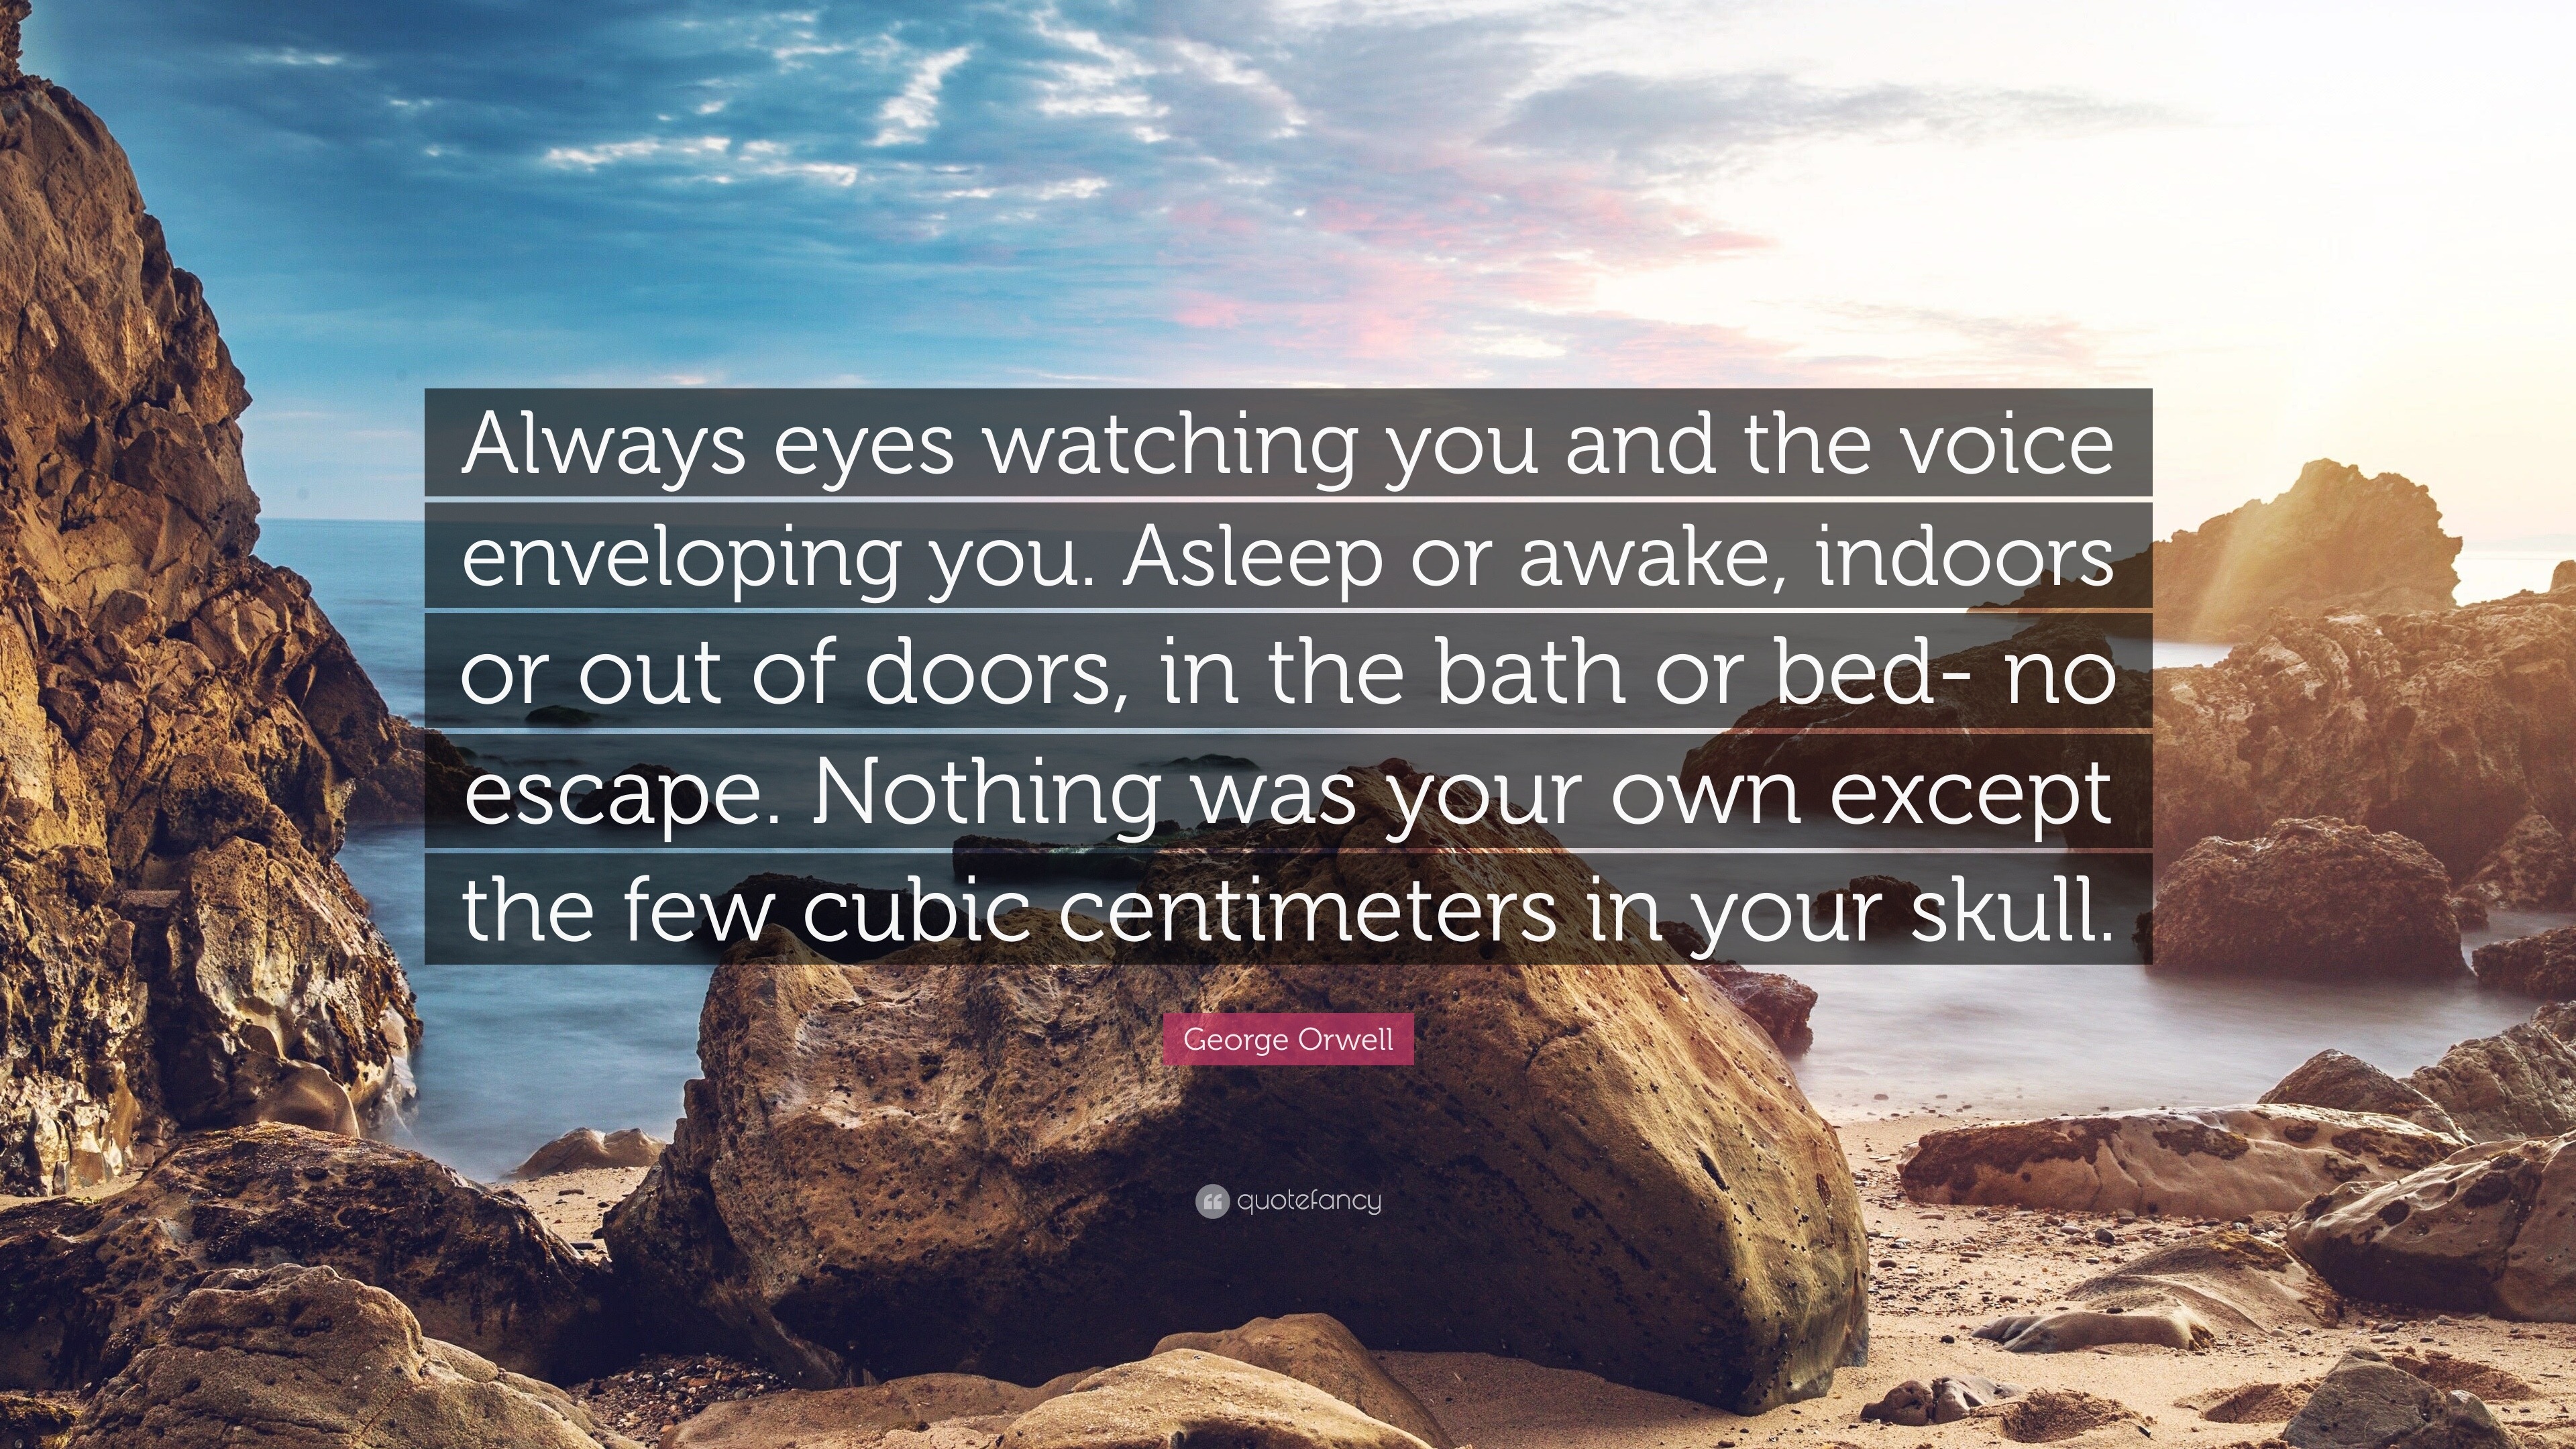 Always eyes watching you and the voice - Quote